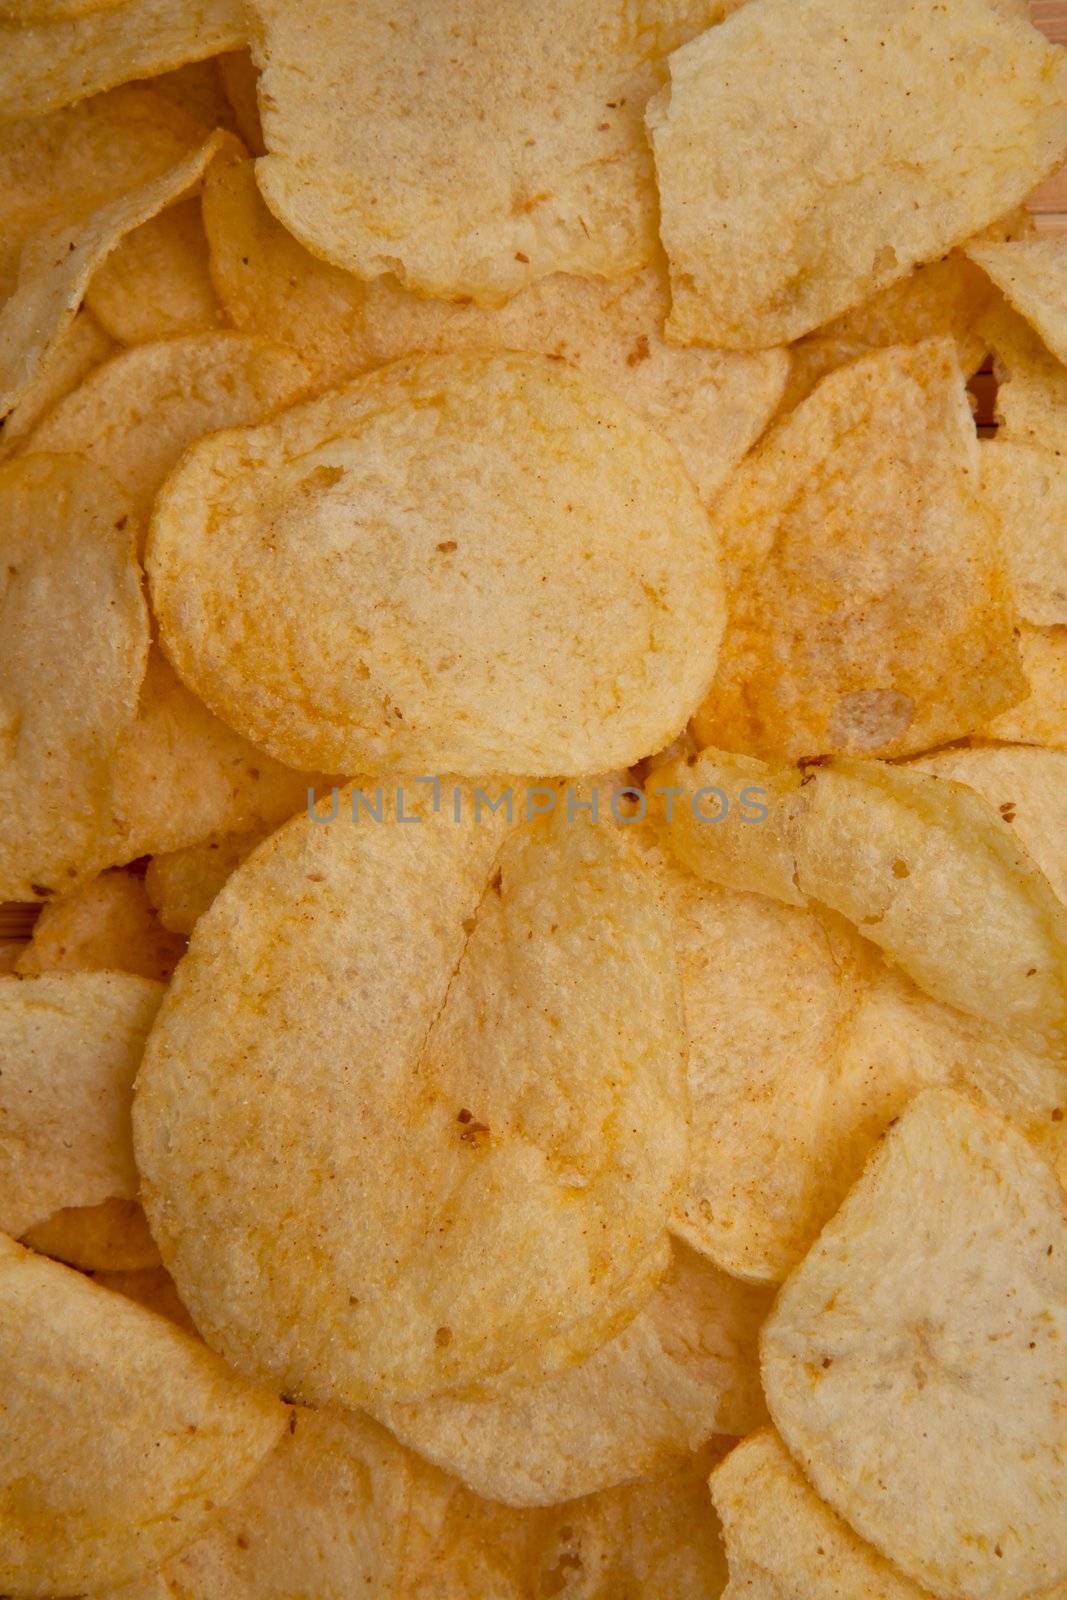 Chips laid out together by Wavebreakmedia